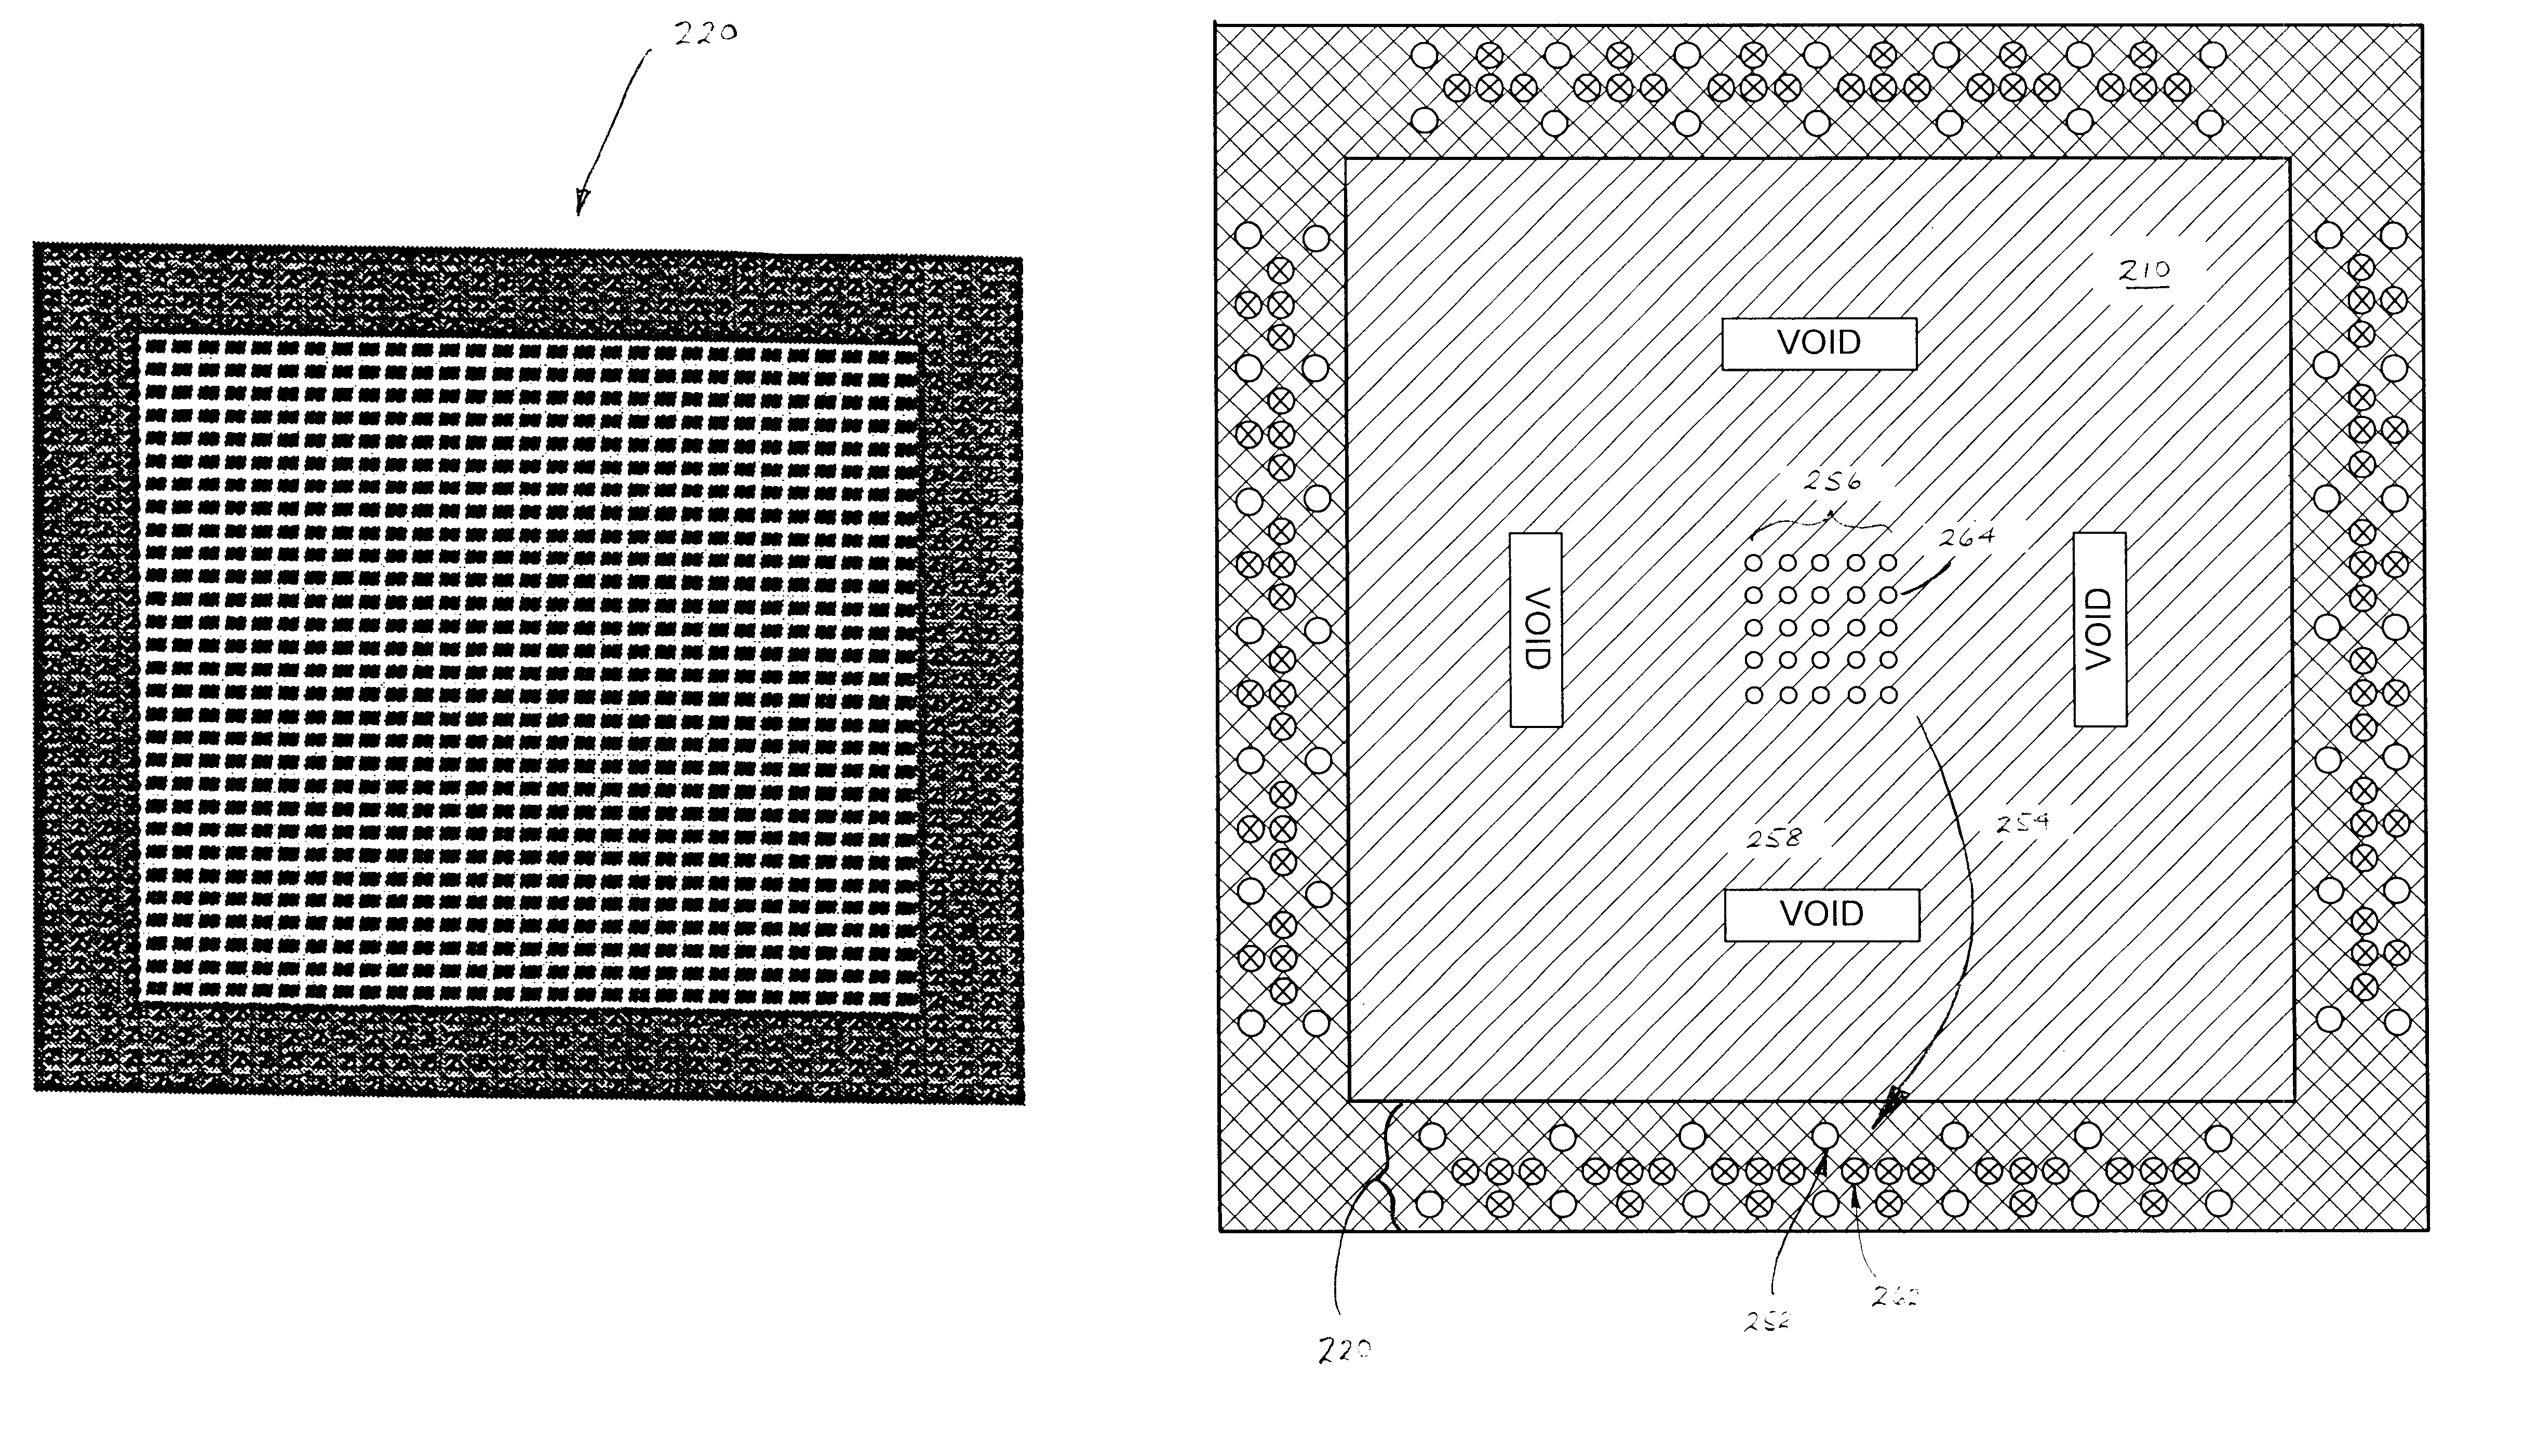 Integrated circuit carrier arrangement for reducing non-uniformity in current flow through power pins